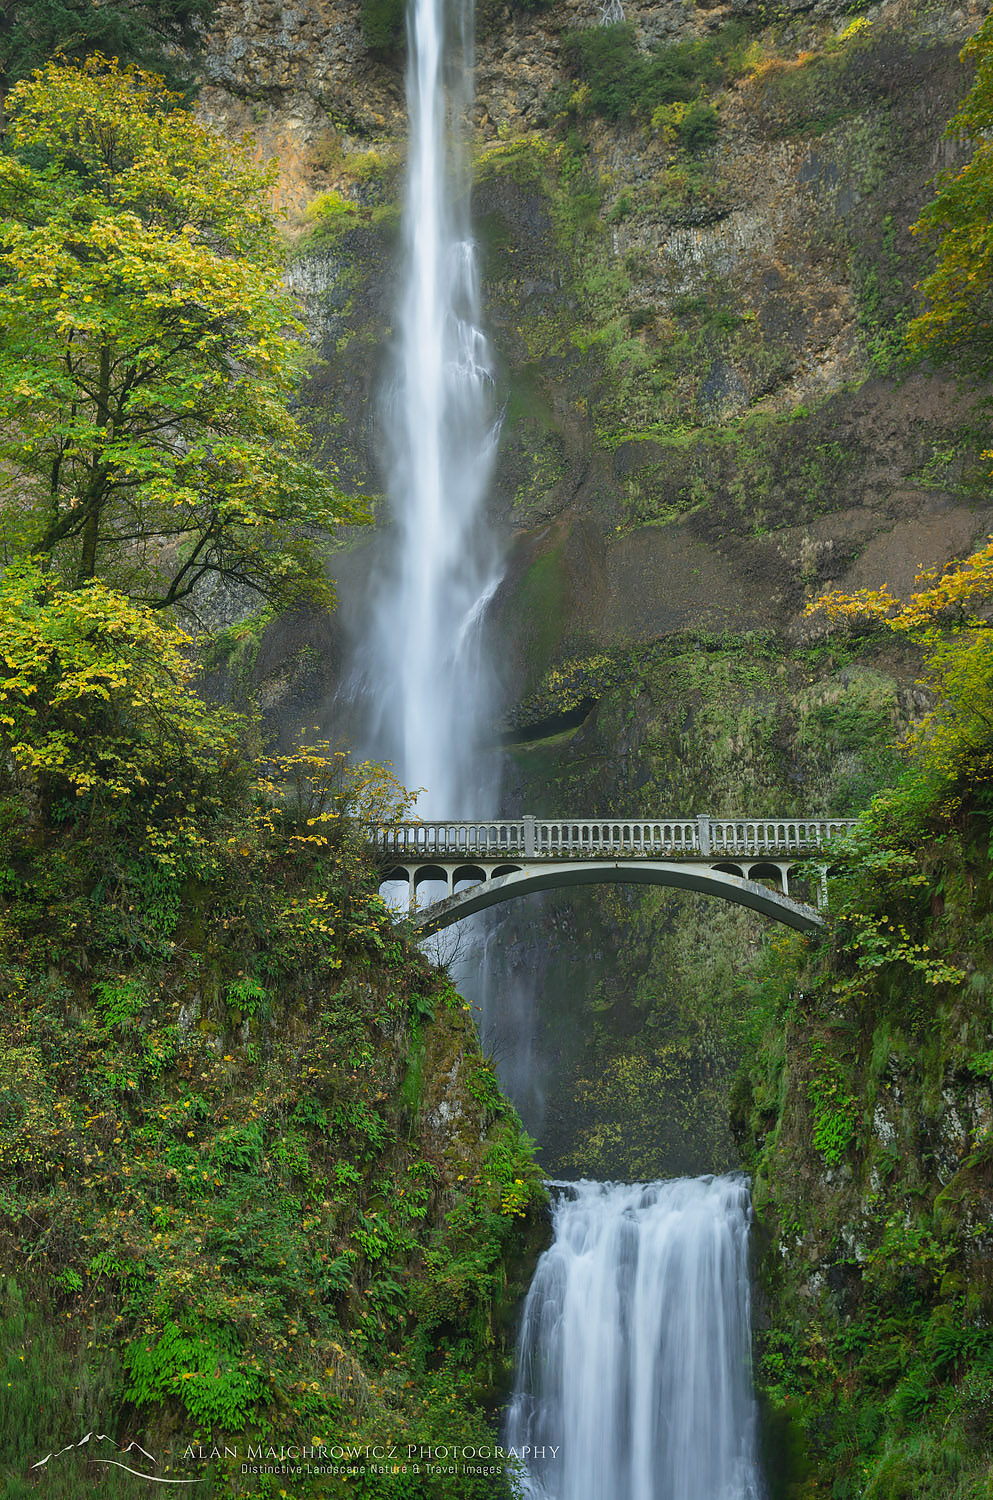 Multnomah Falls, one of the most well known scenic attractions in Oregon and the Pacific Northwest, Columbia River Gorge National Scenic Area Oregon #46813